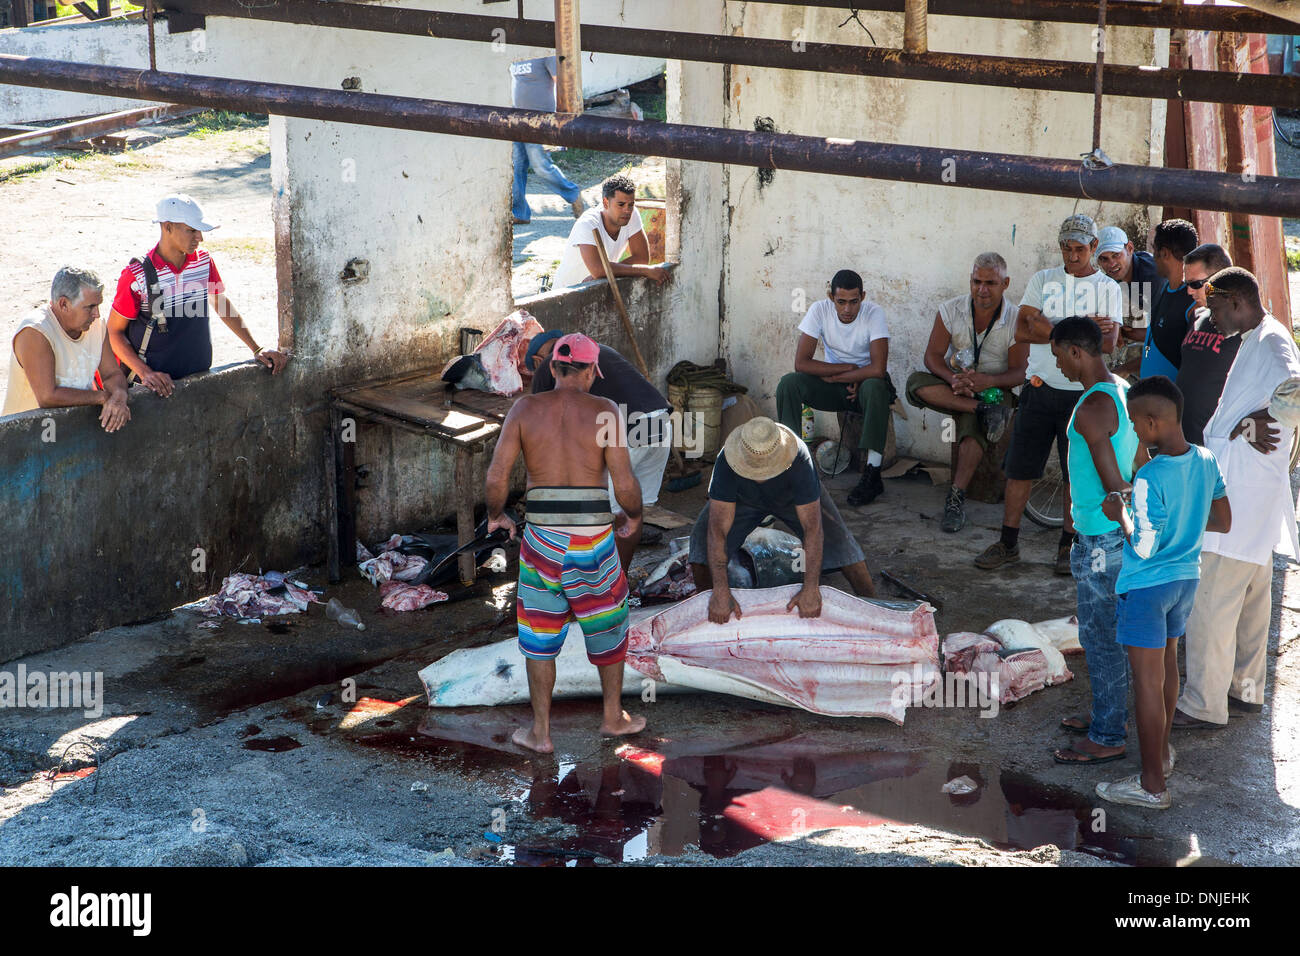 CUTTING UP A BIG SHARK IN COJIMAR, SMALL FISHING VILLAGE TO THE EAST OF HAVANA FROM WHERE ERNEST HEMINGWAY LIKED TO LEAVE TO GO FISHING IN THE SEA, THE INSPIRATION FOR HIS BOOK 'THE OLD MAN AND THE SEA', CUBA, THE CARIBBEAN Stock Photo